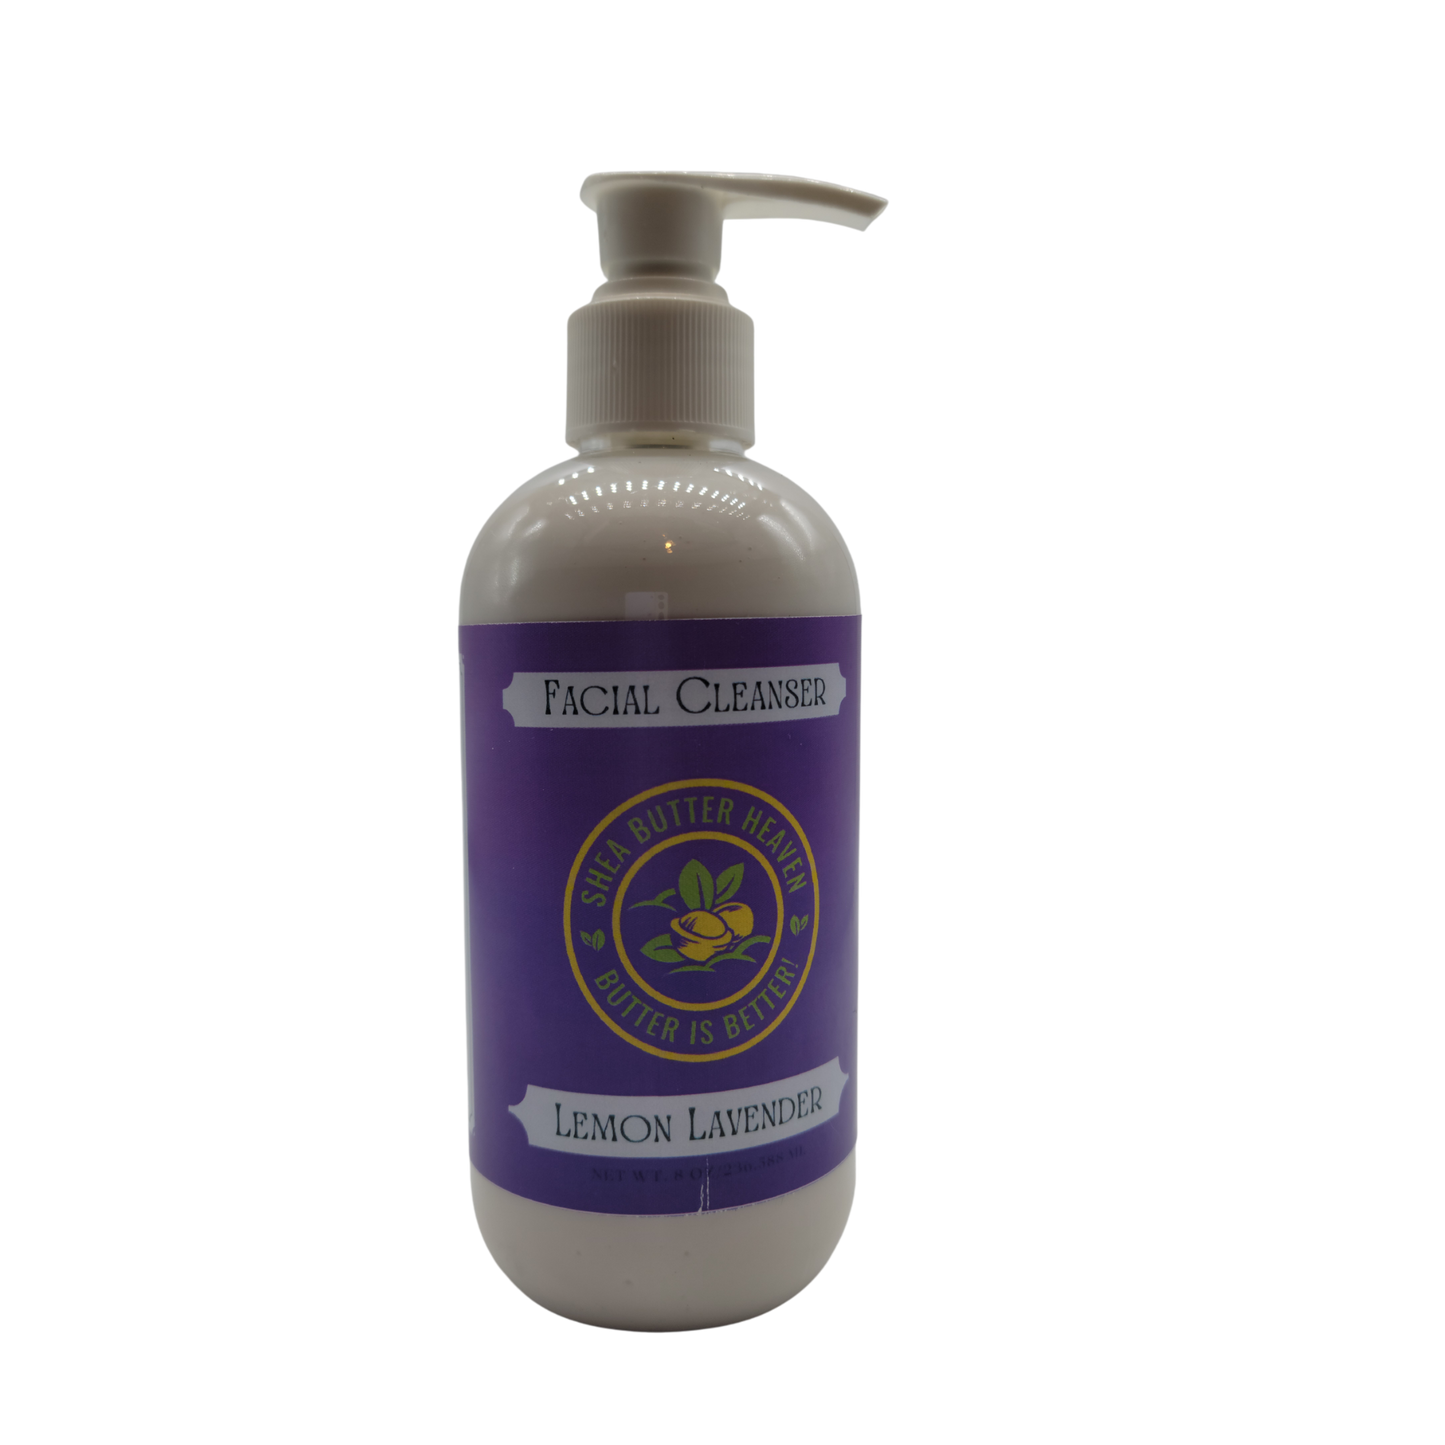 Lemon Lavender smells like a clean and inviting - a fresh blend of tangy lemon, bright citrus and soft lavender flowers.  8 oz facial cleanser